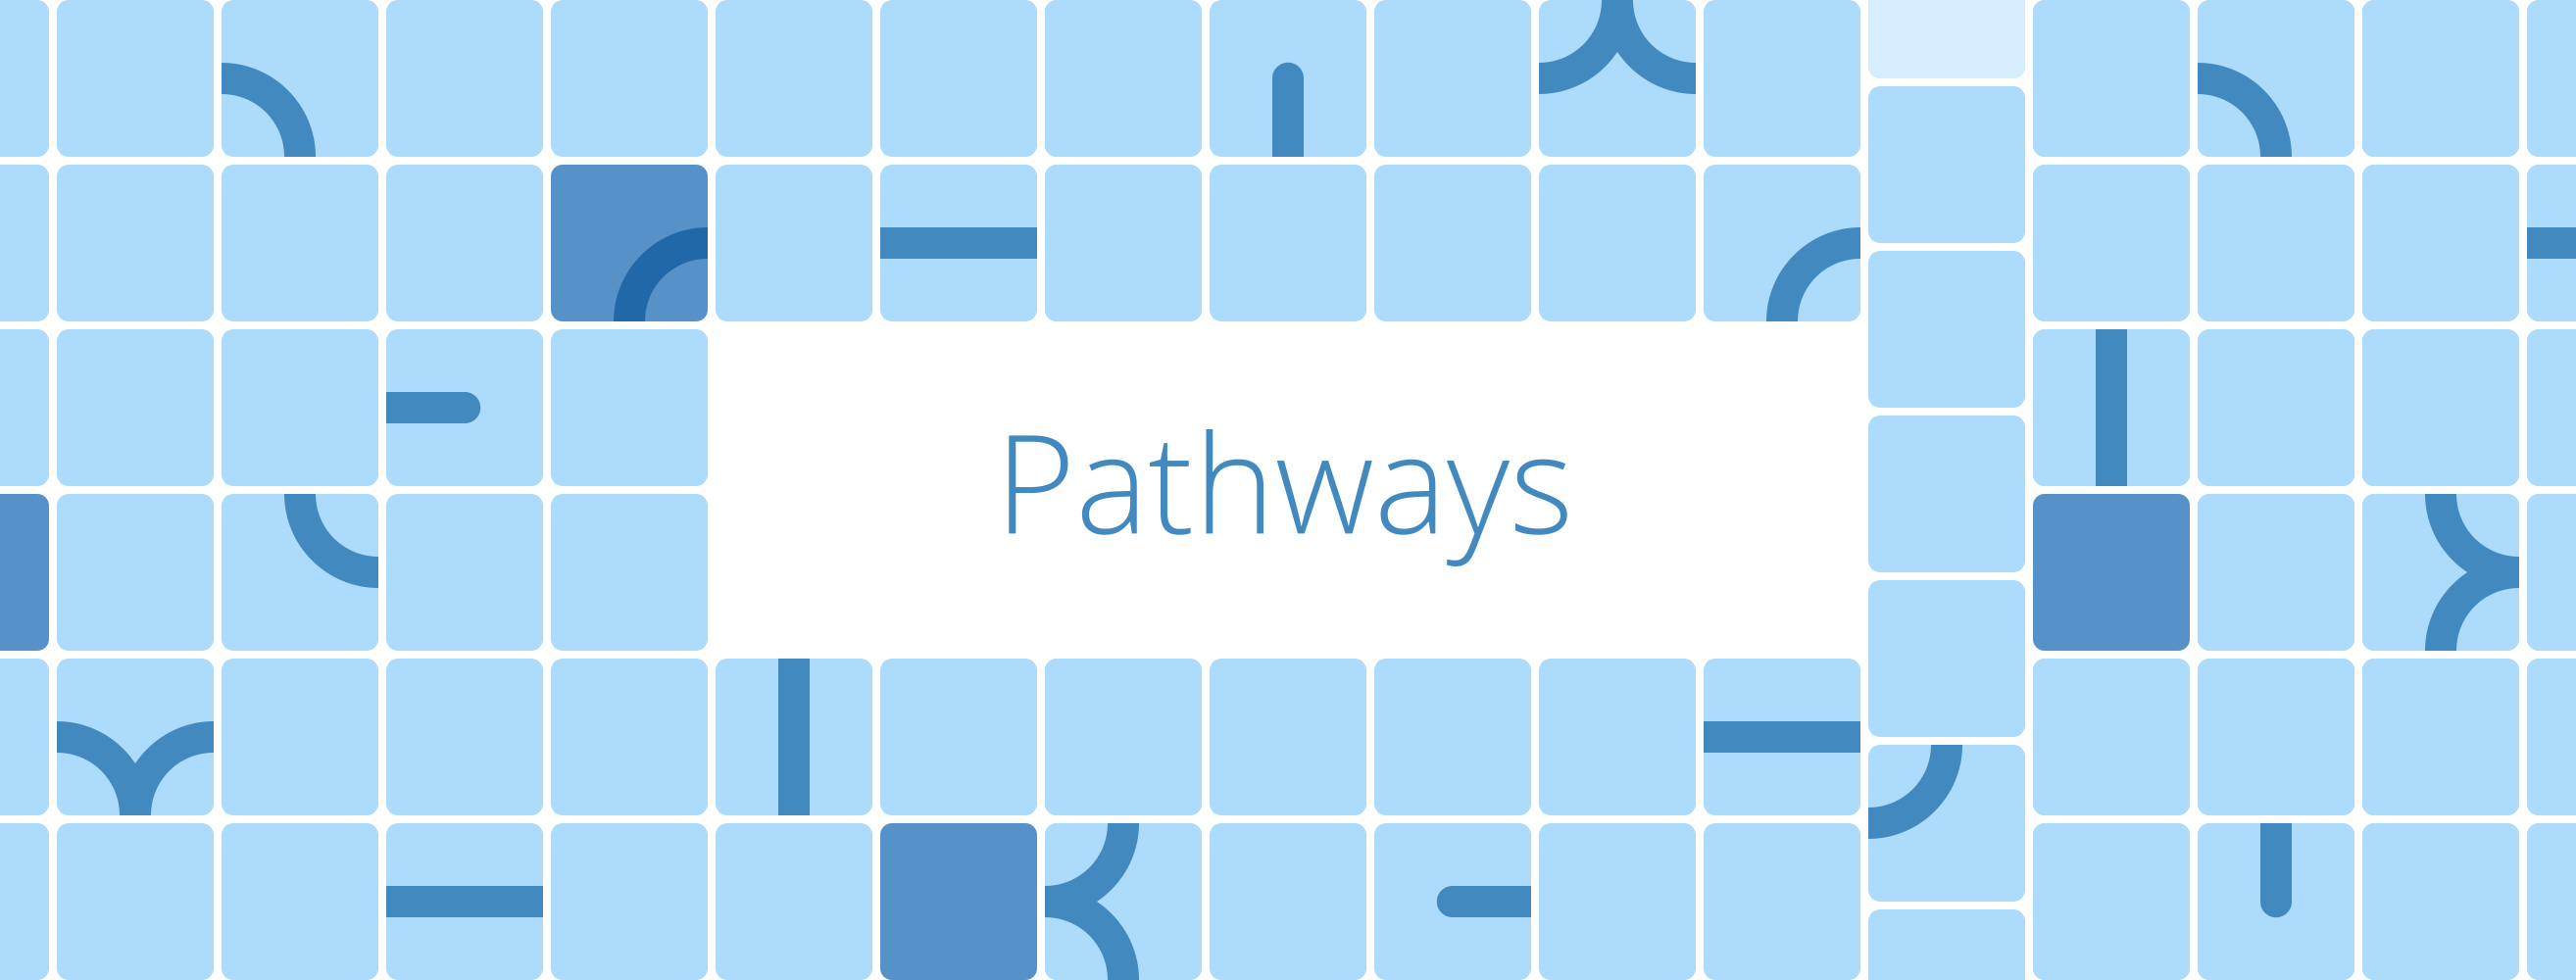 Pathway for ios download free